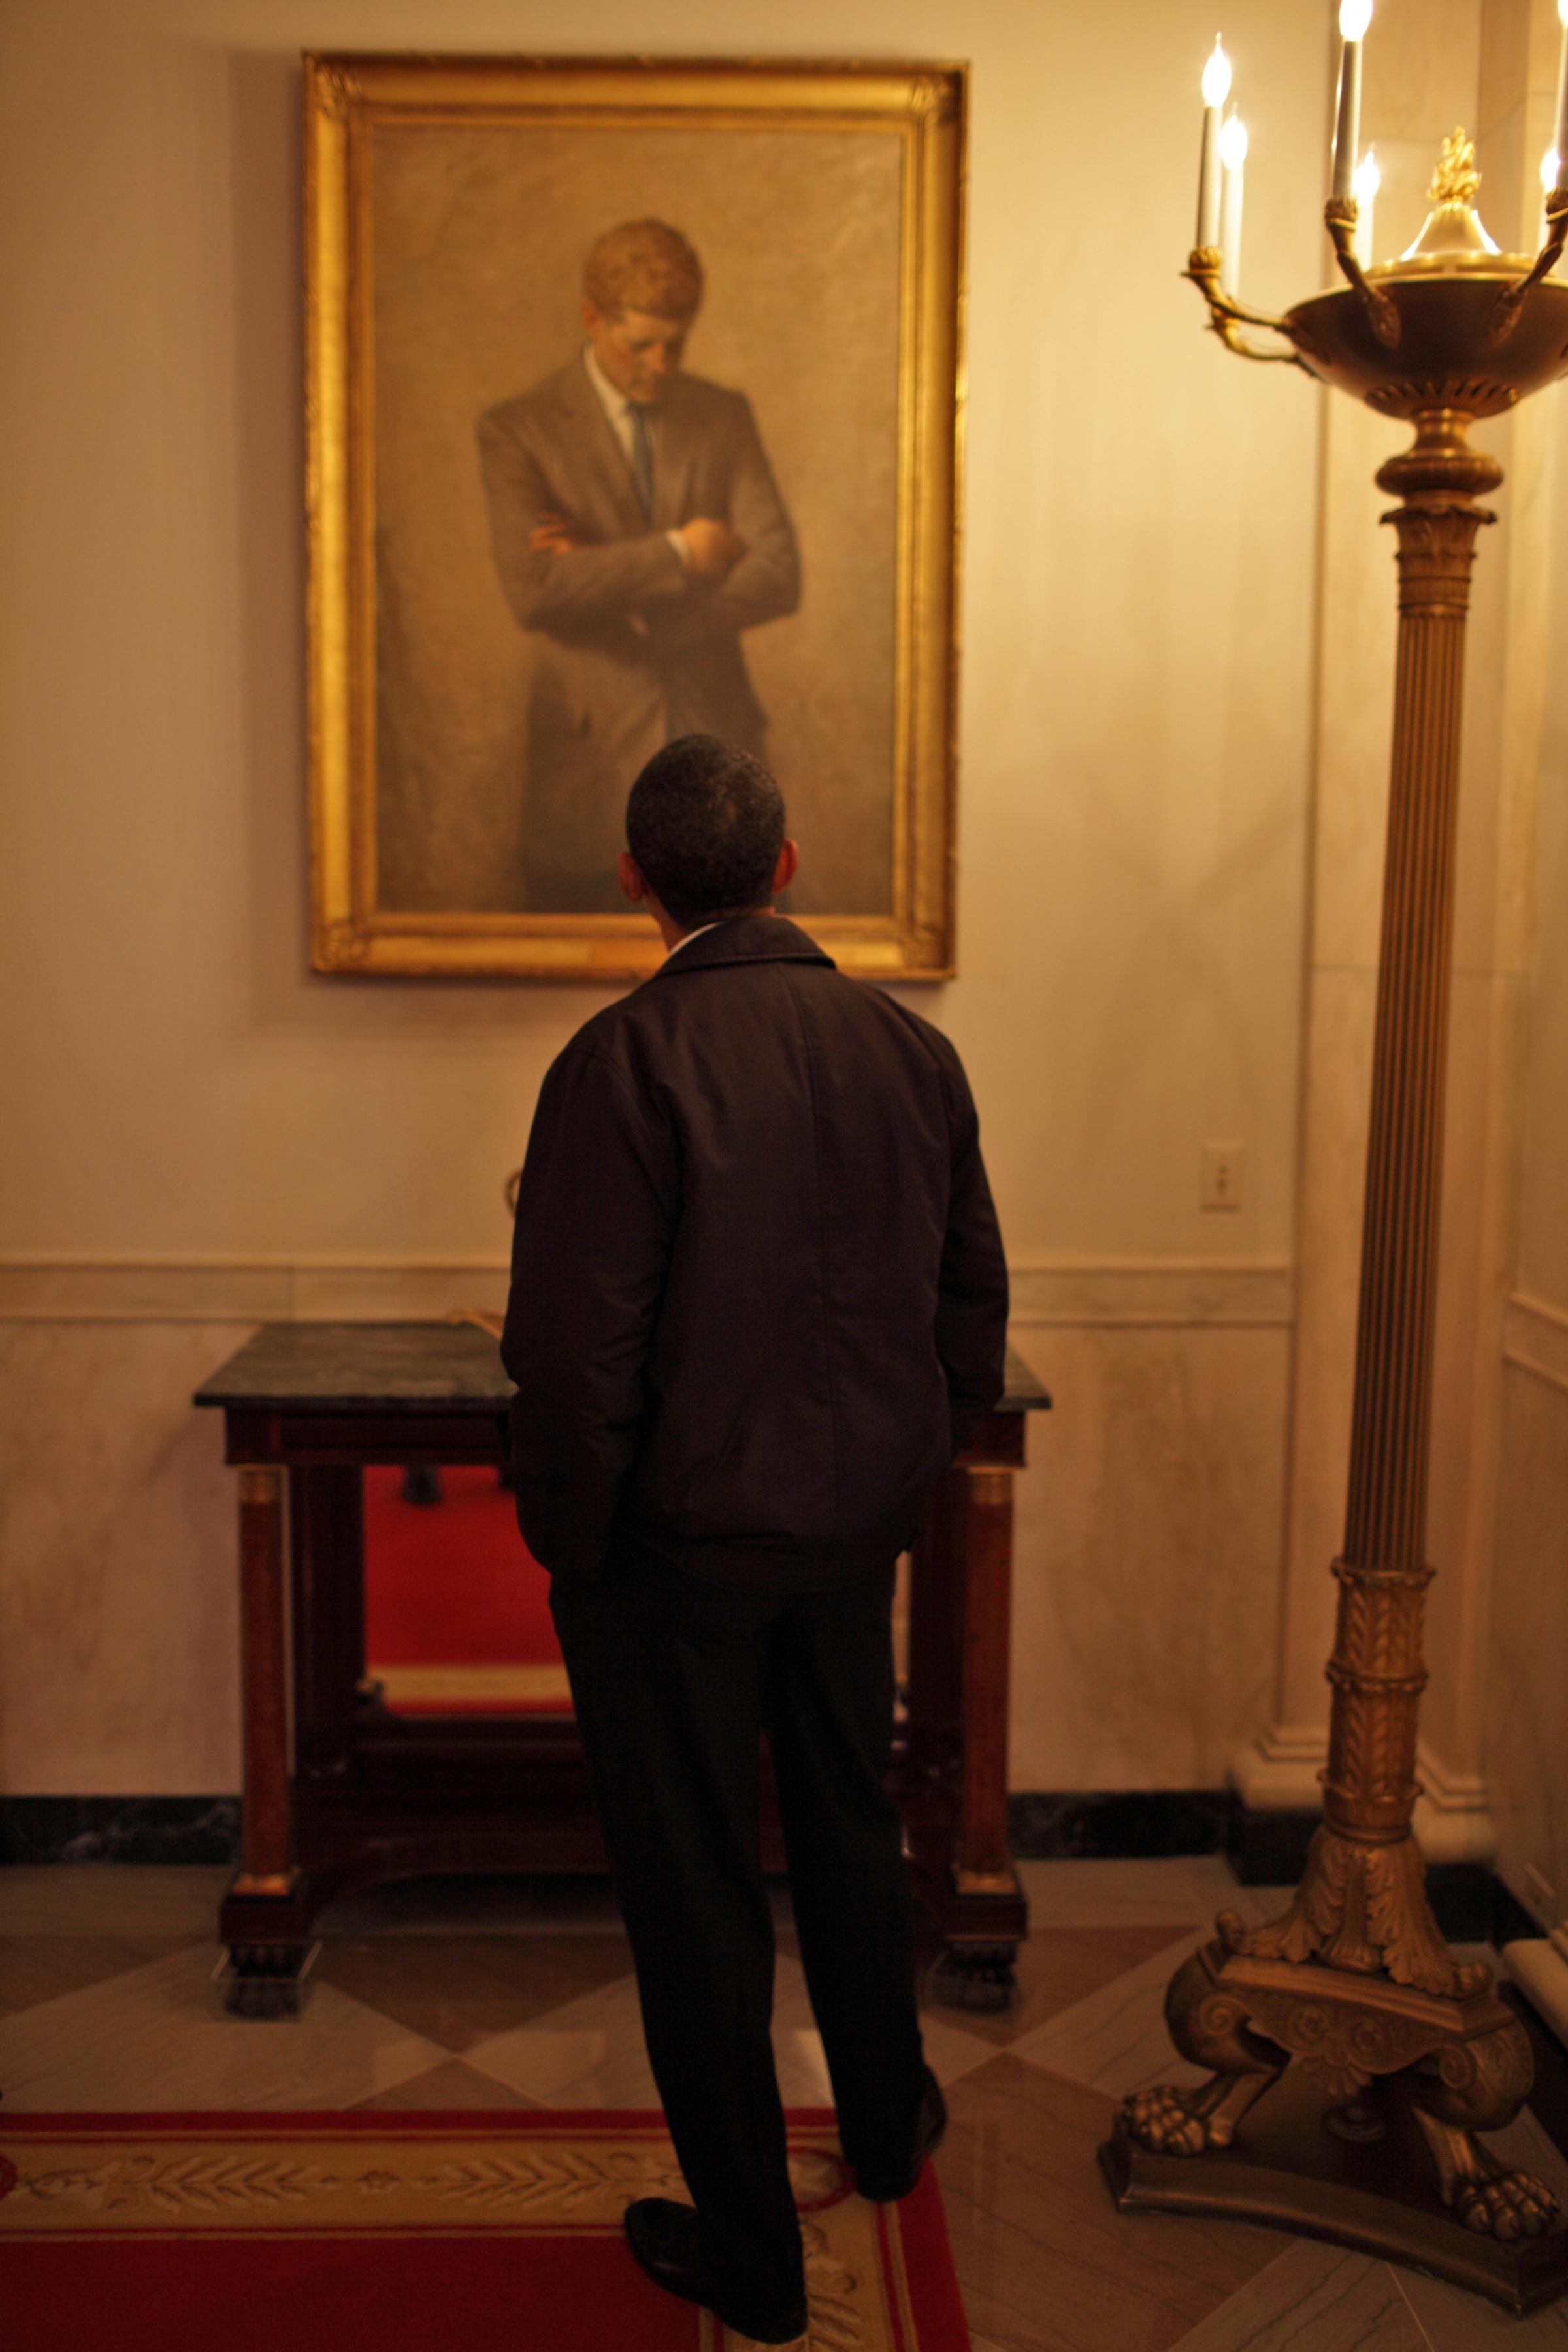 President Barack Obama checks out a portrait of President John Kennedy during an historical tour of the White House residence and grounds in Washington, DC., on Jan. 1, 2009.